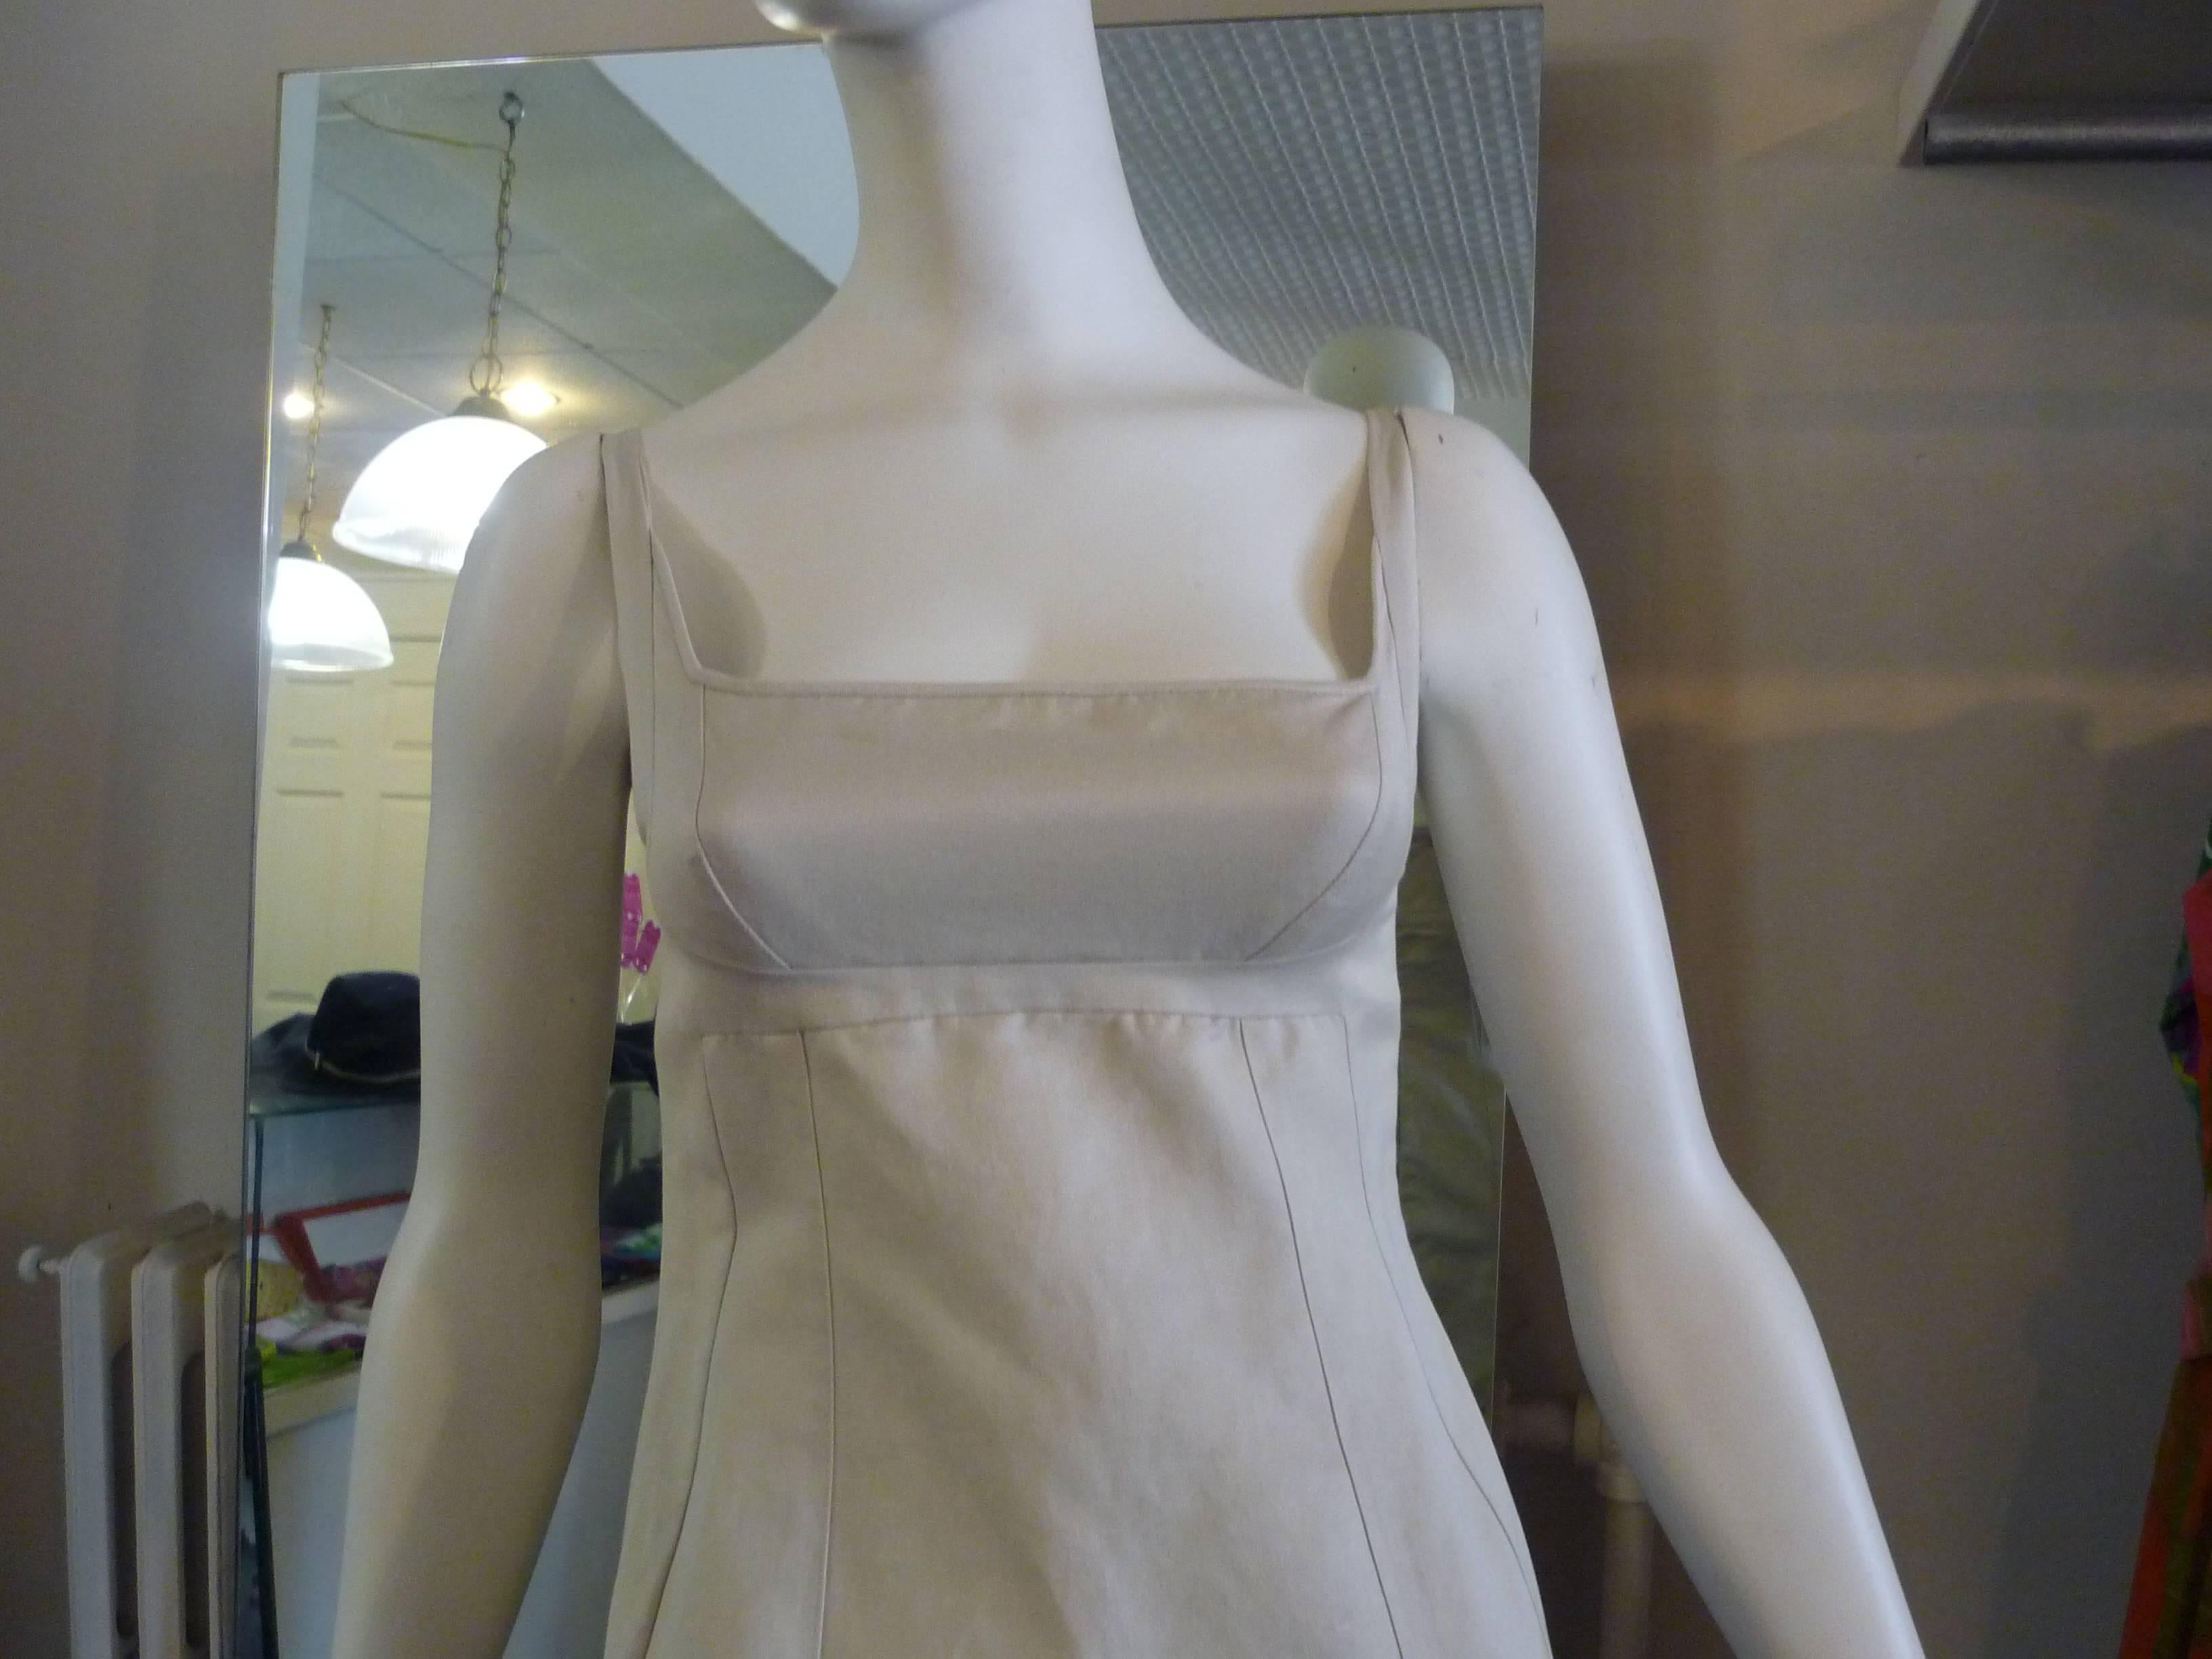 Nice simple dress with wonderful seam work inside and out, which is something Narciso Rodriguez is known for.

The back closure is by way of an exposed zipper which runs the lenght of the dress.

The color is a light beige.

The dress is in